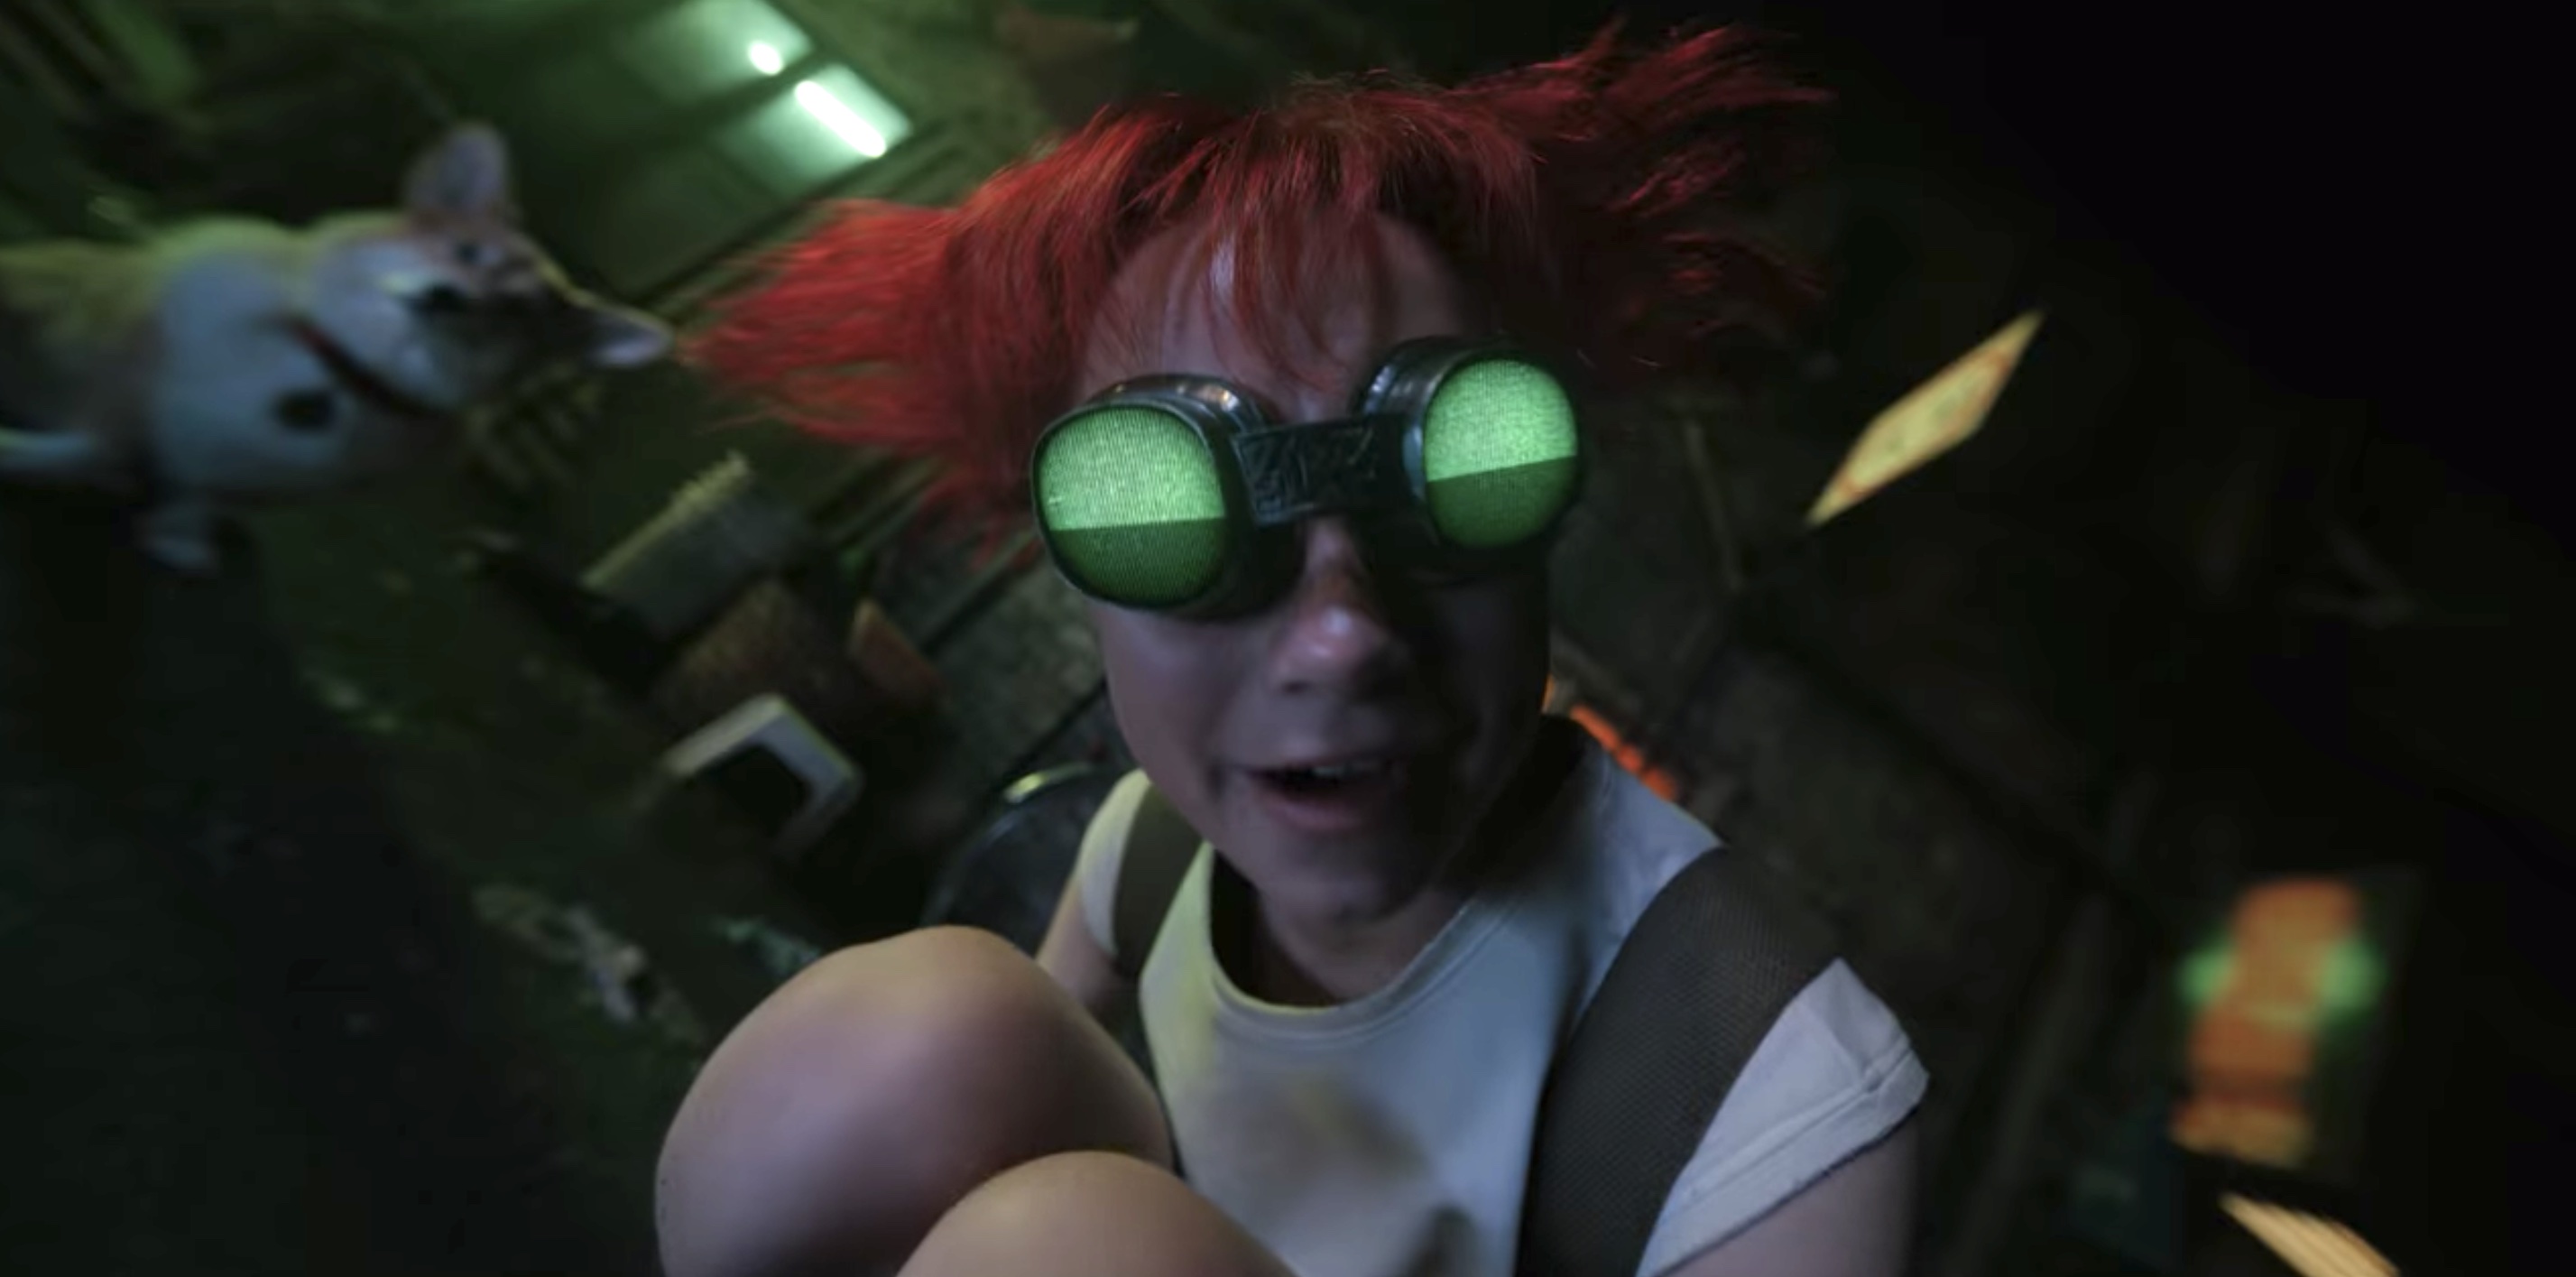 Ed (played by Eden Perkins) with red hair, green goggles, their white t-shirt, acting wild next to Ein the corgi doll in Cowboy Bebop